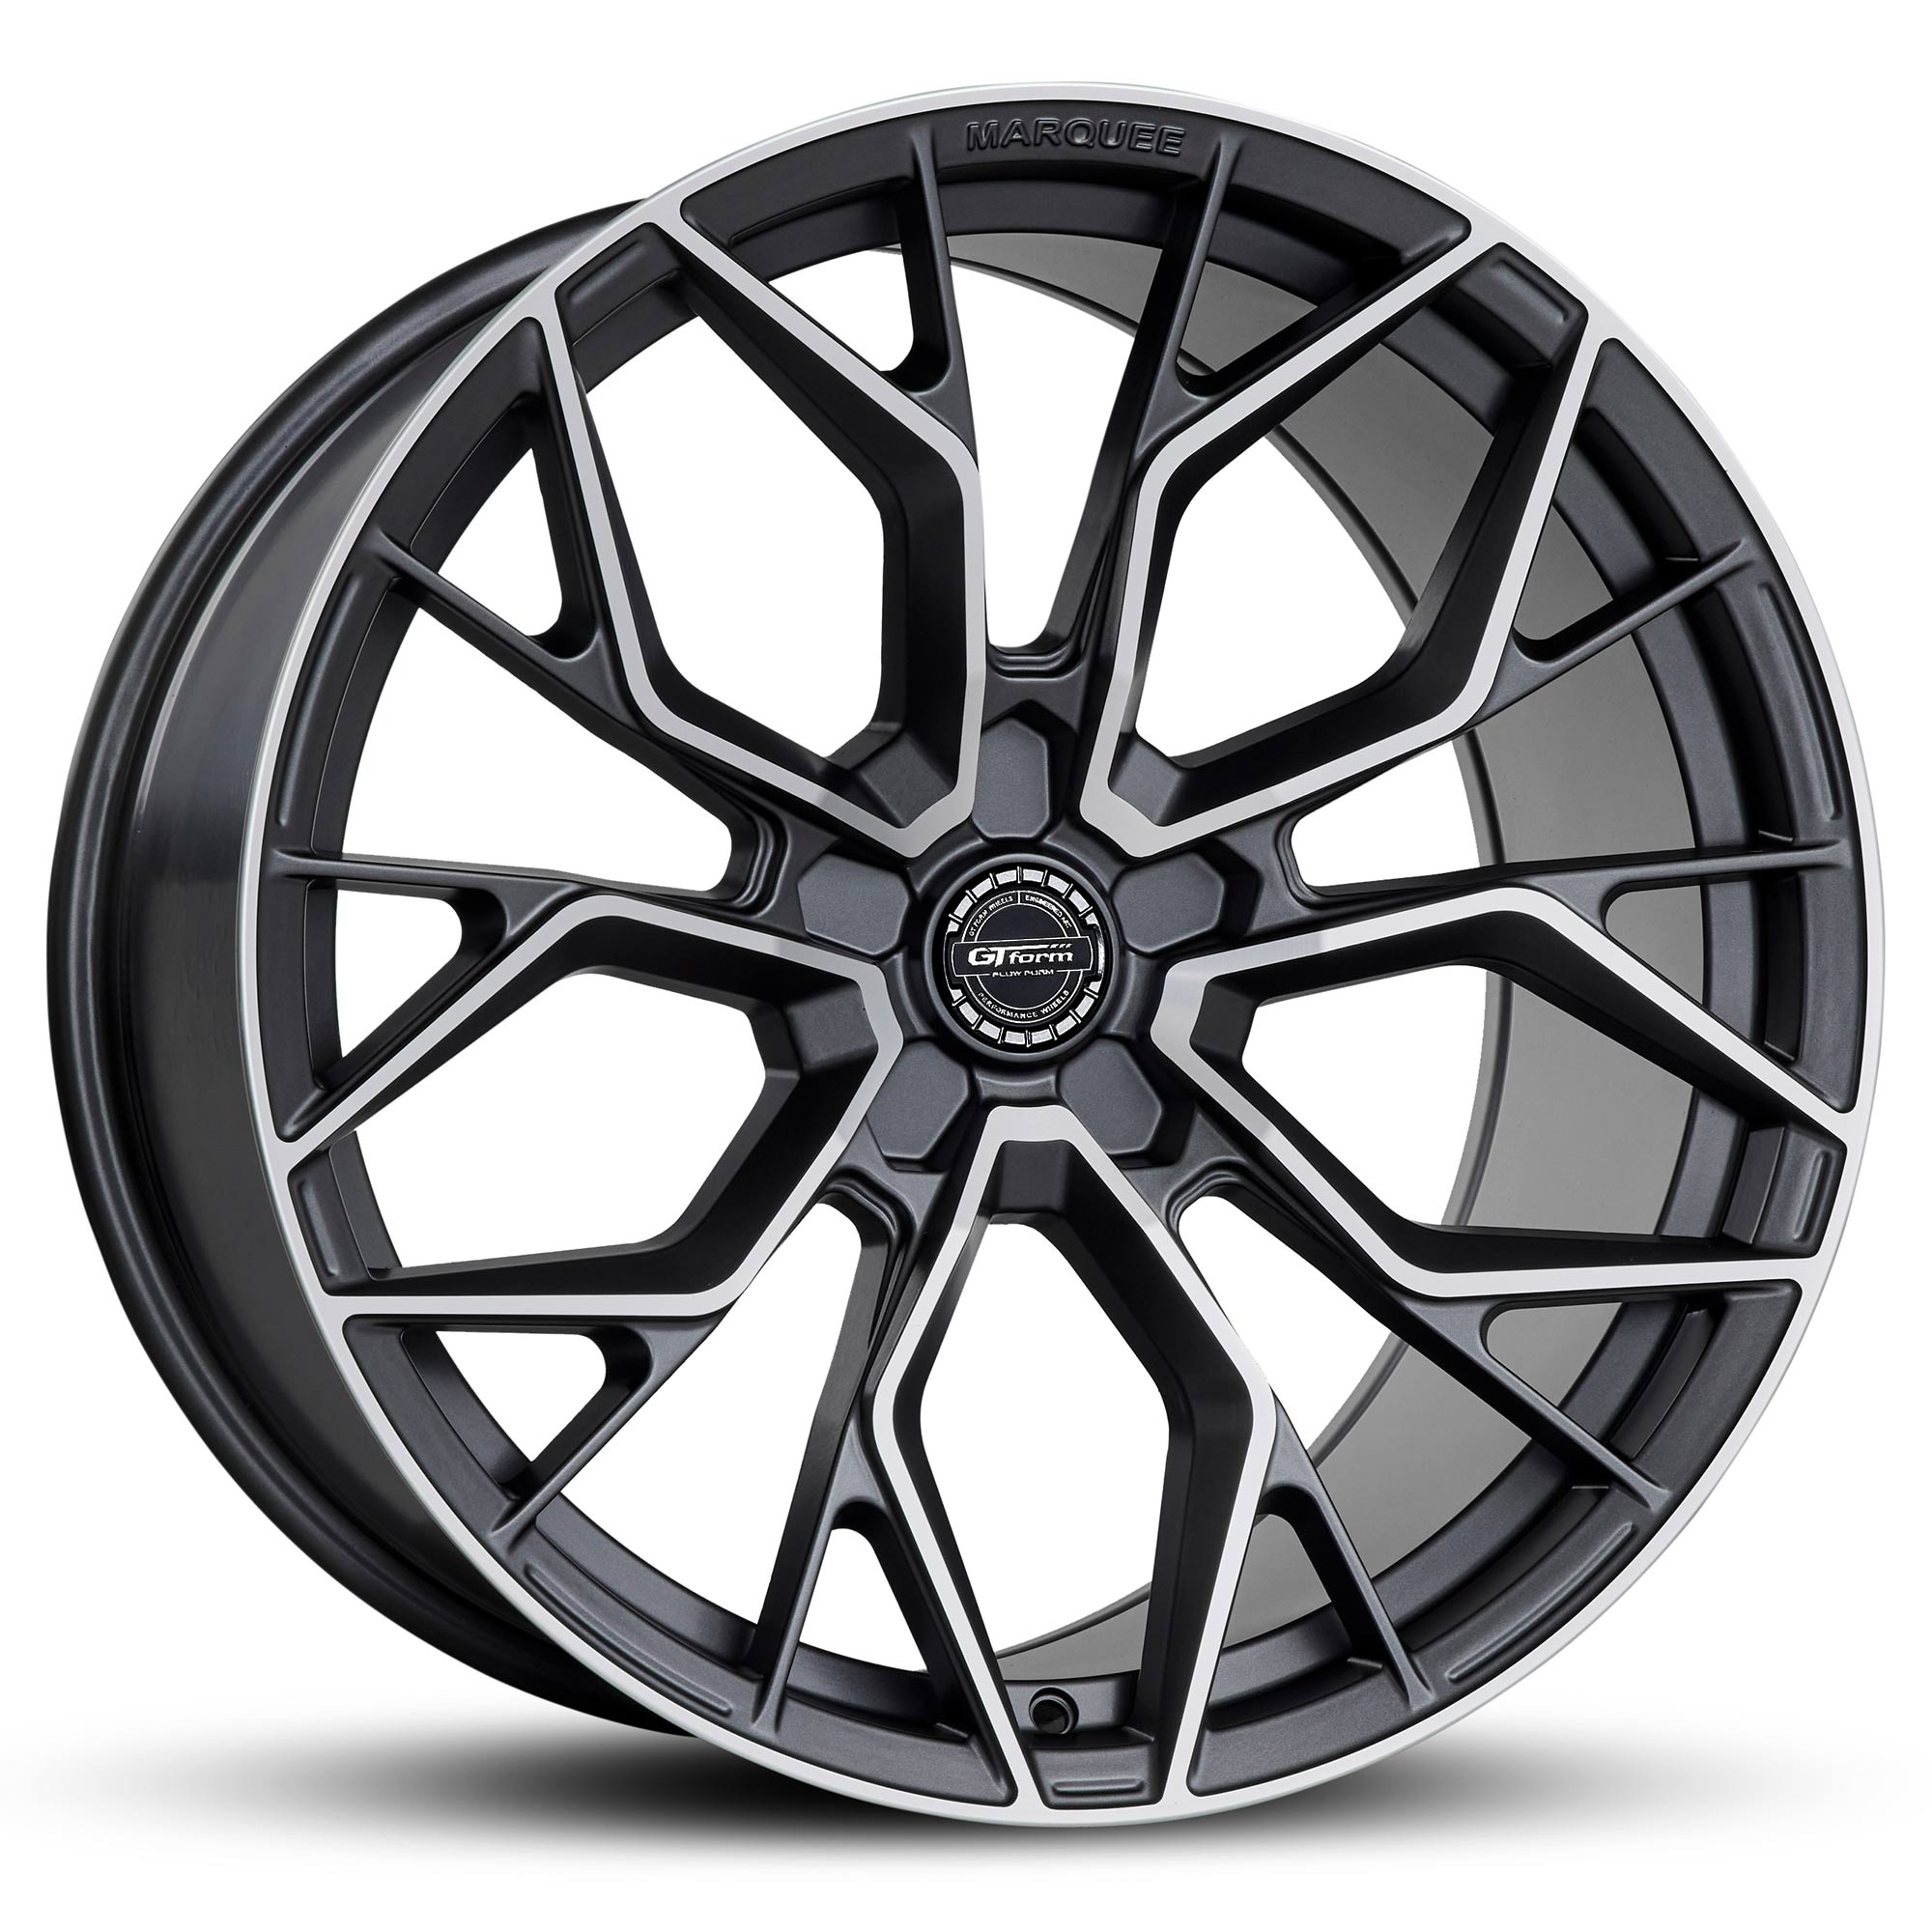 GT FORM MARQUEE GUNMETAL MACHINED FACE 20X10.5